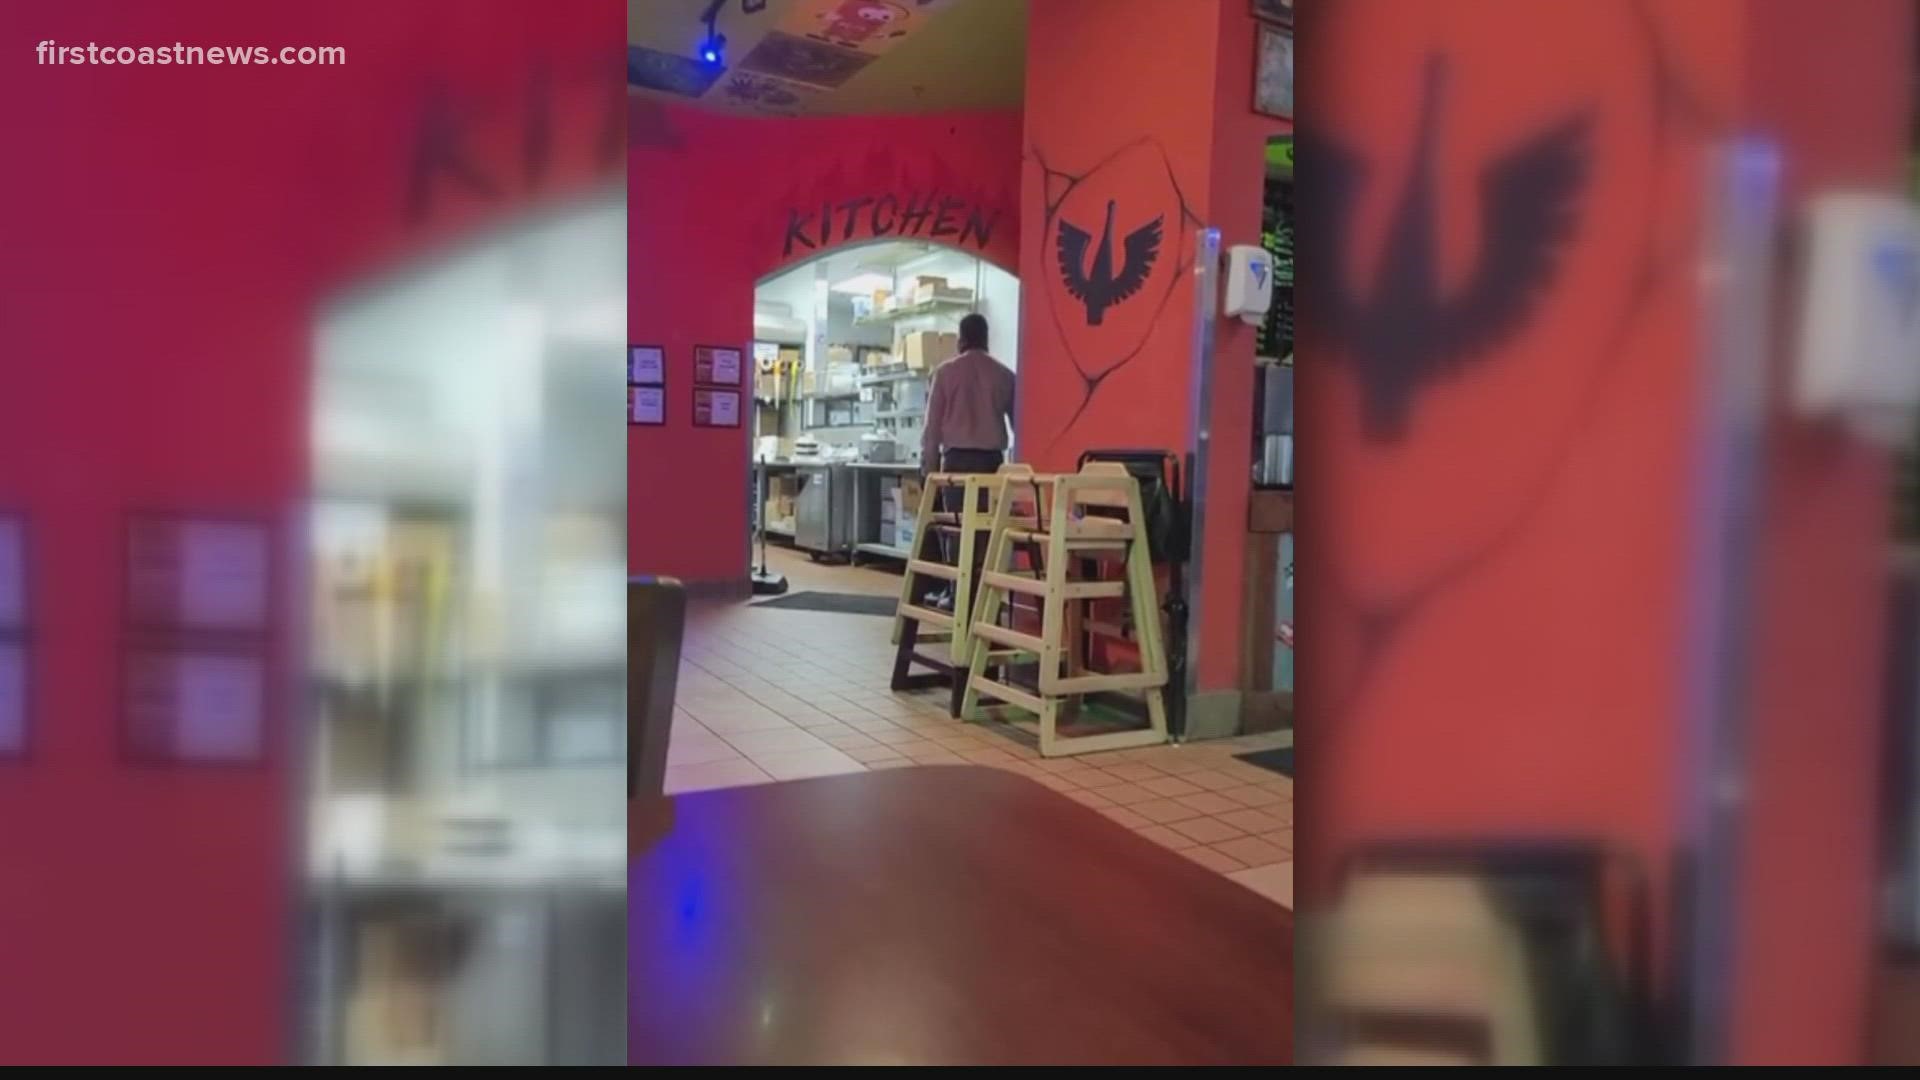 The incident happened Monday night at the Tijuana Flats near Jacksonville International Airport. The man left before police arrived.